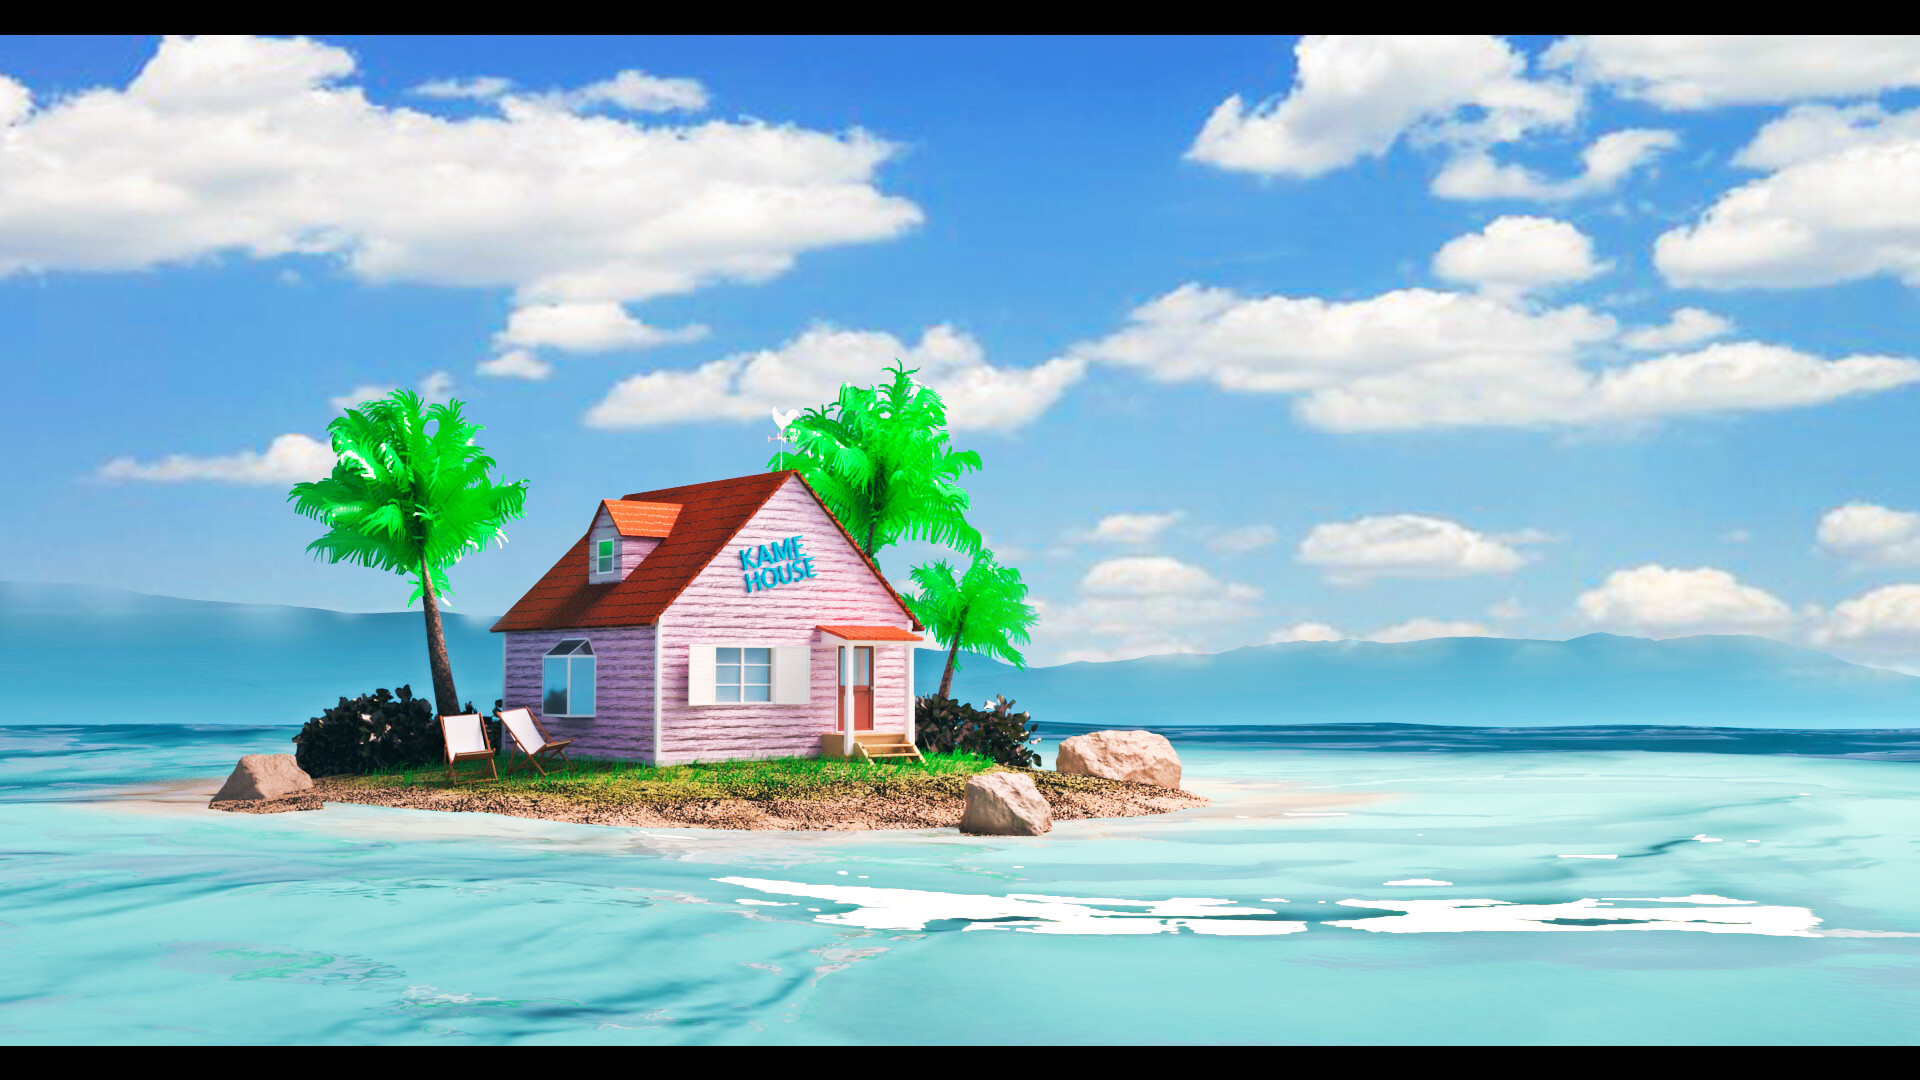 Kame House Wallpapers Top Free Kame House Backgrounds Wallpaperaccess.